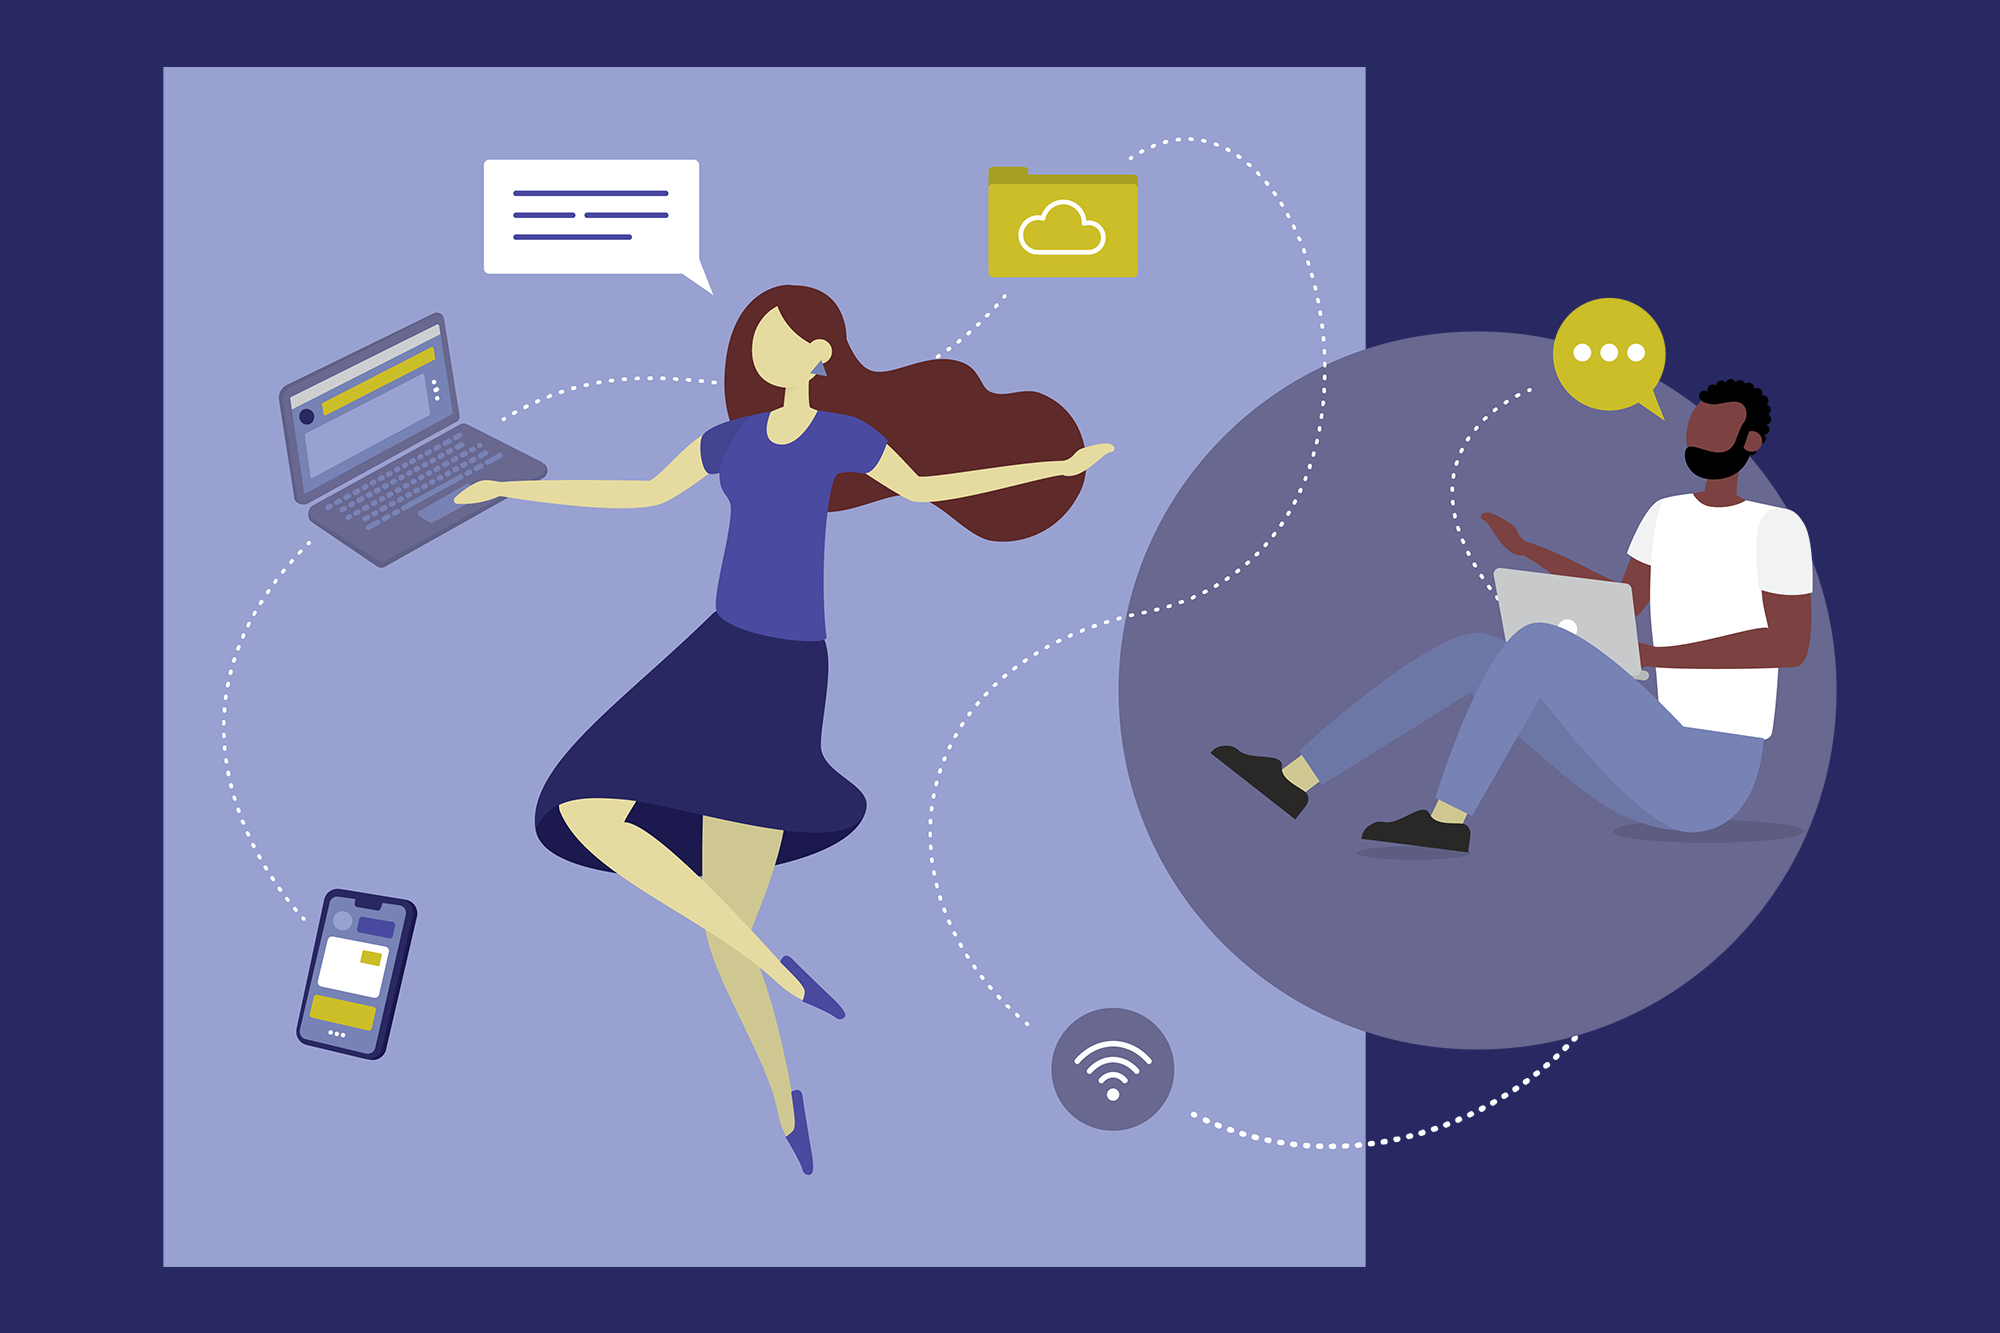 An illustration depicting two users communicating via a range of business technology and communications services.